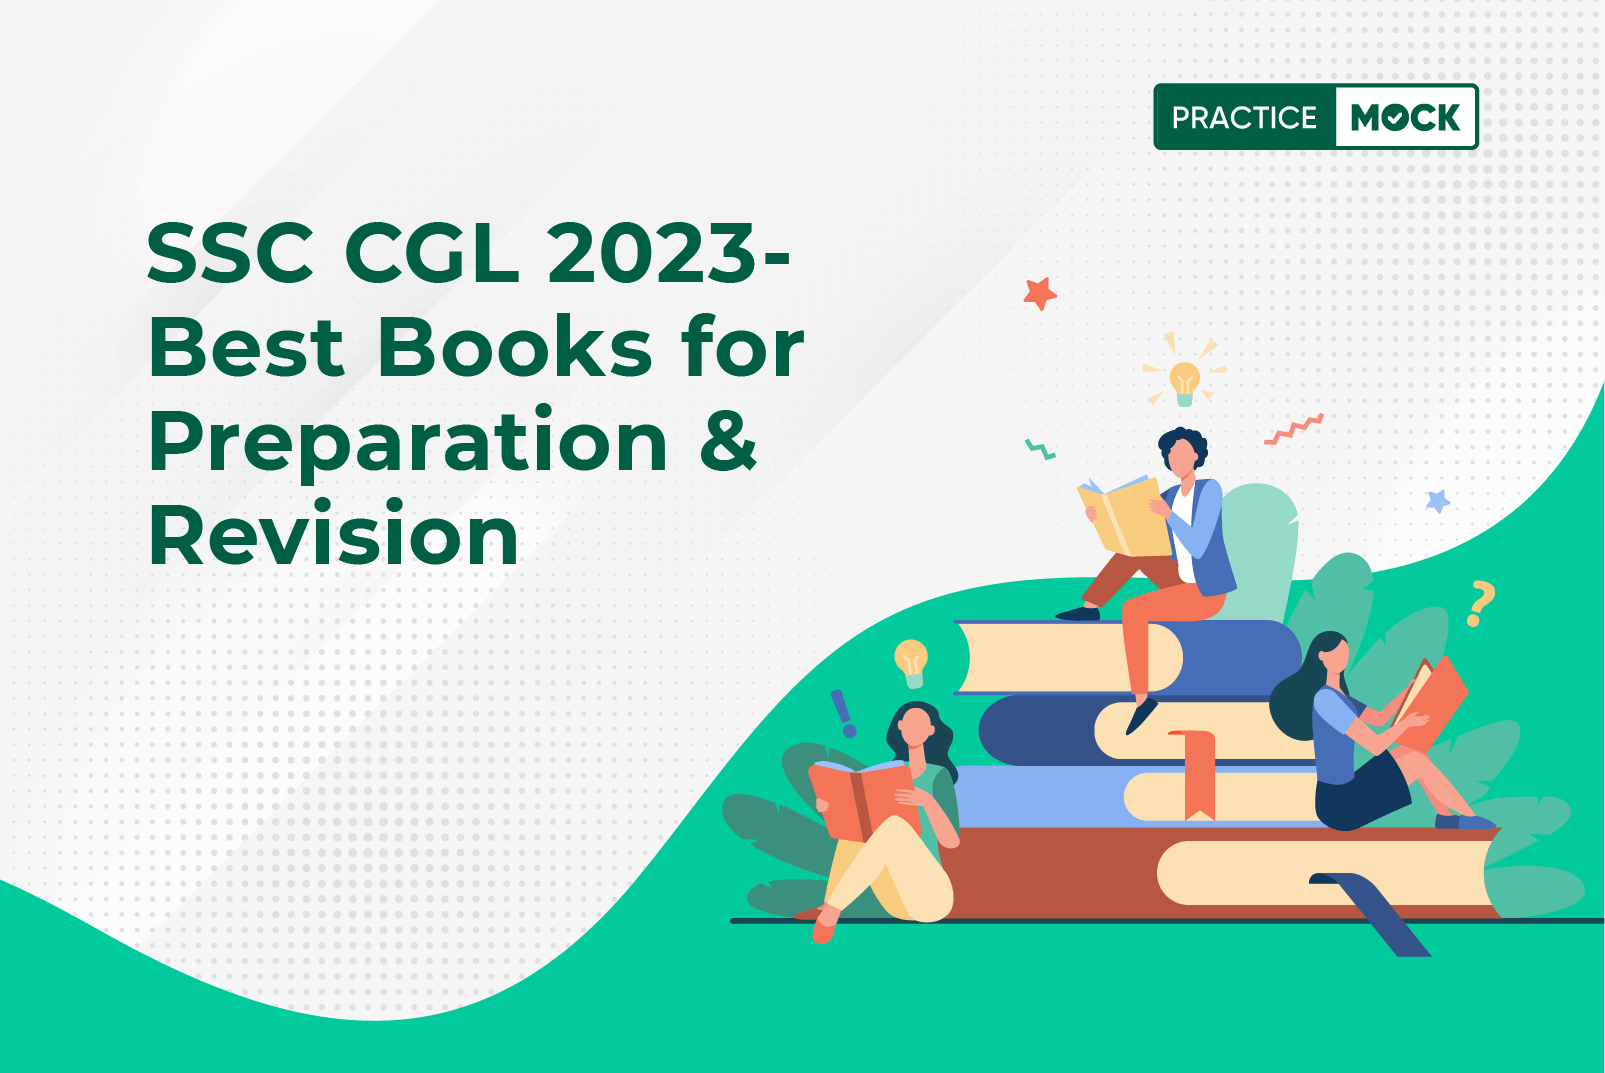 SSC CGL Best Books for Preparation & Revision PracticeMock